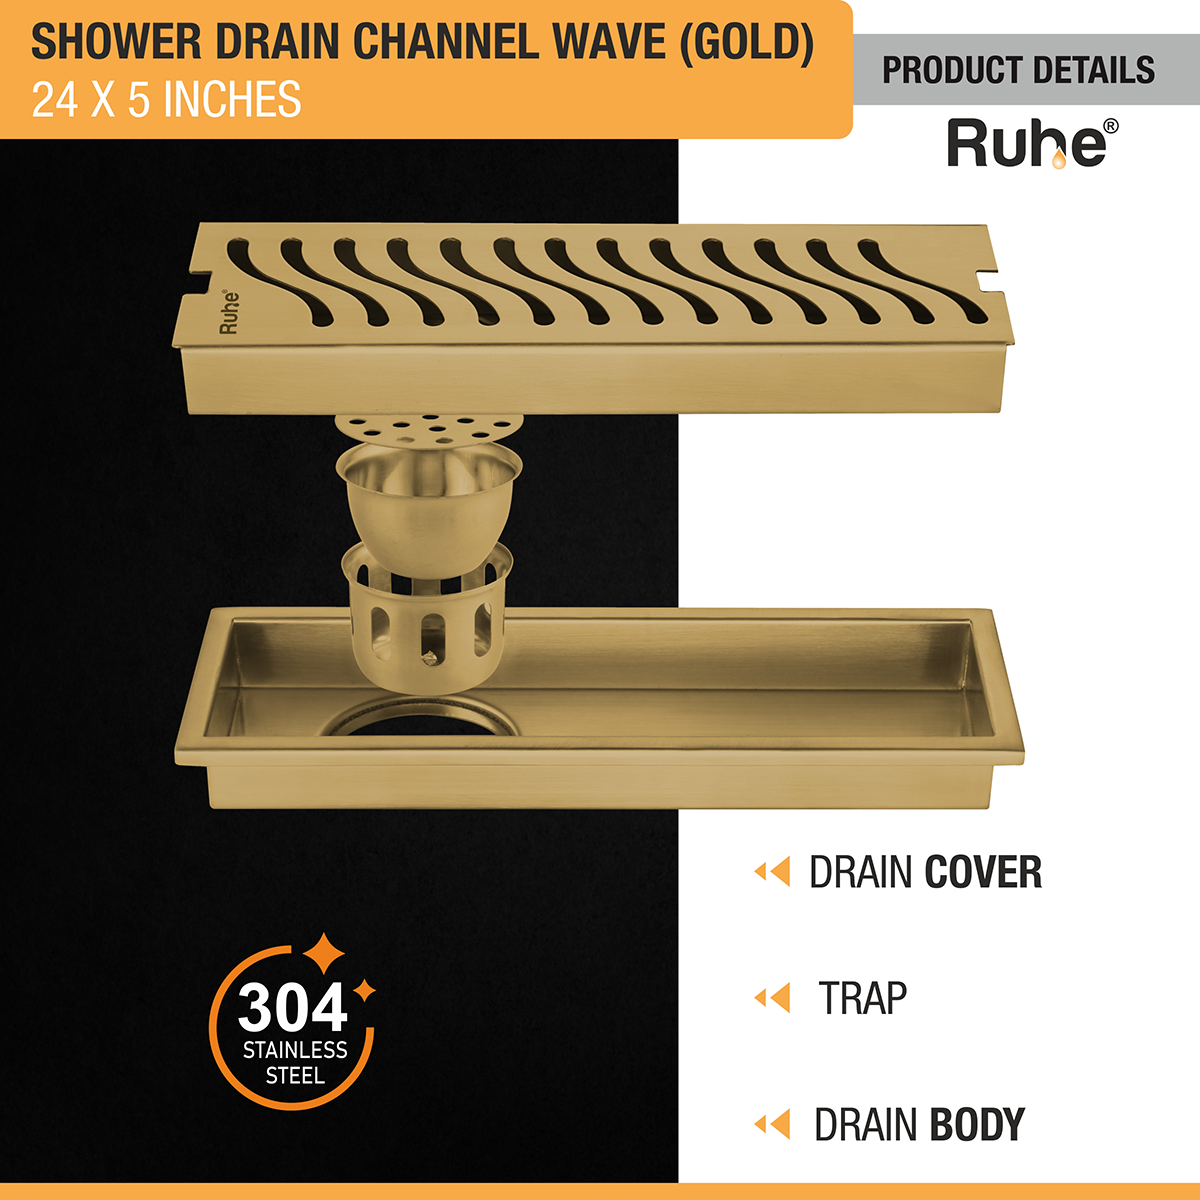 Wave Shower Drain Channel (24 x 5 Inches) YELLOW GOLD product details